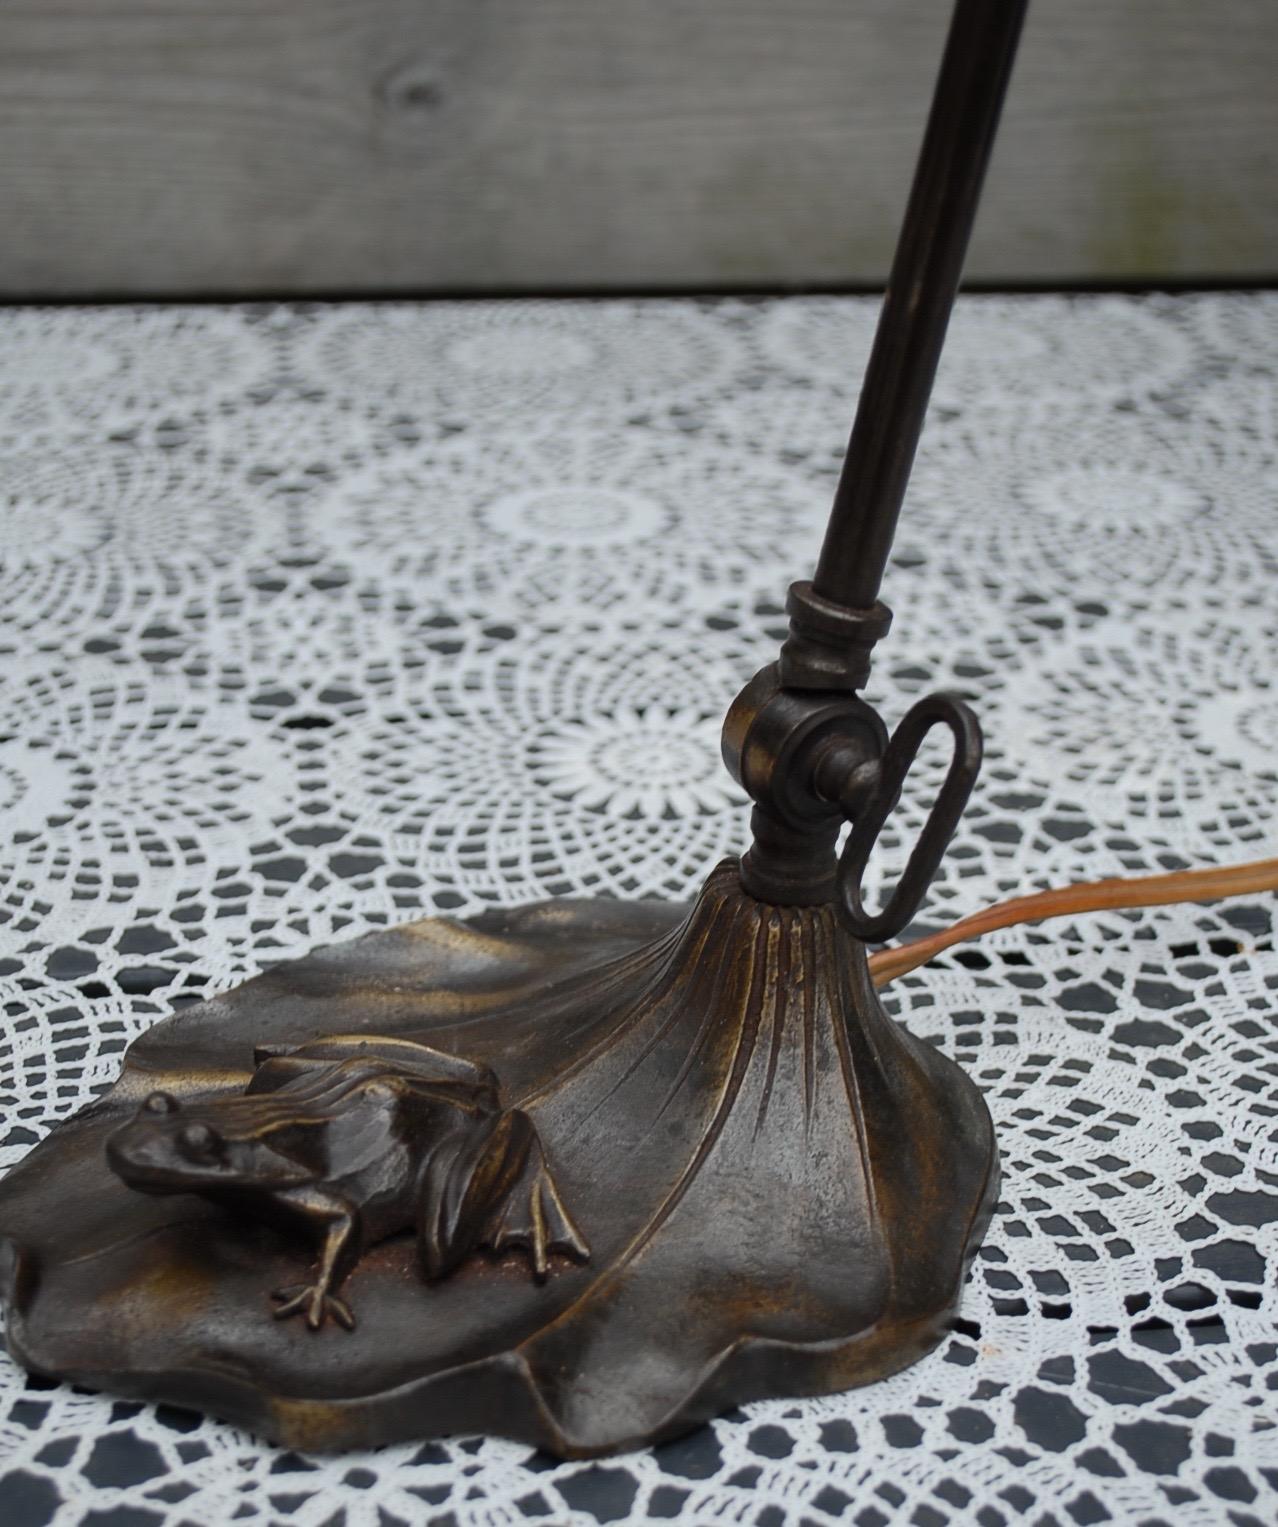 Highly Decorative & Artistic Table Desk Lamp w Bronze Frog Sculpture & Butterfly 12